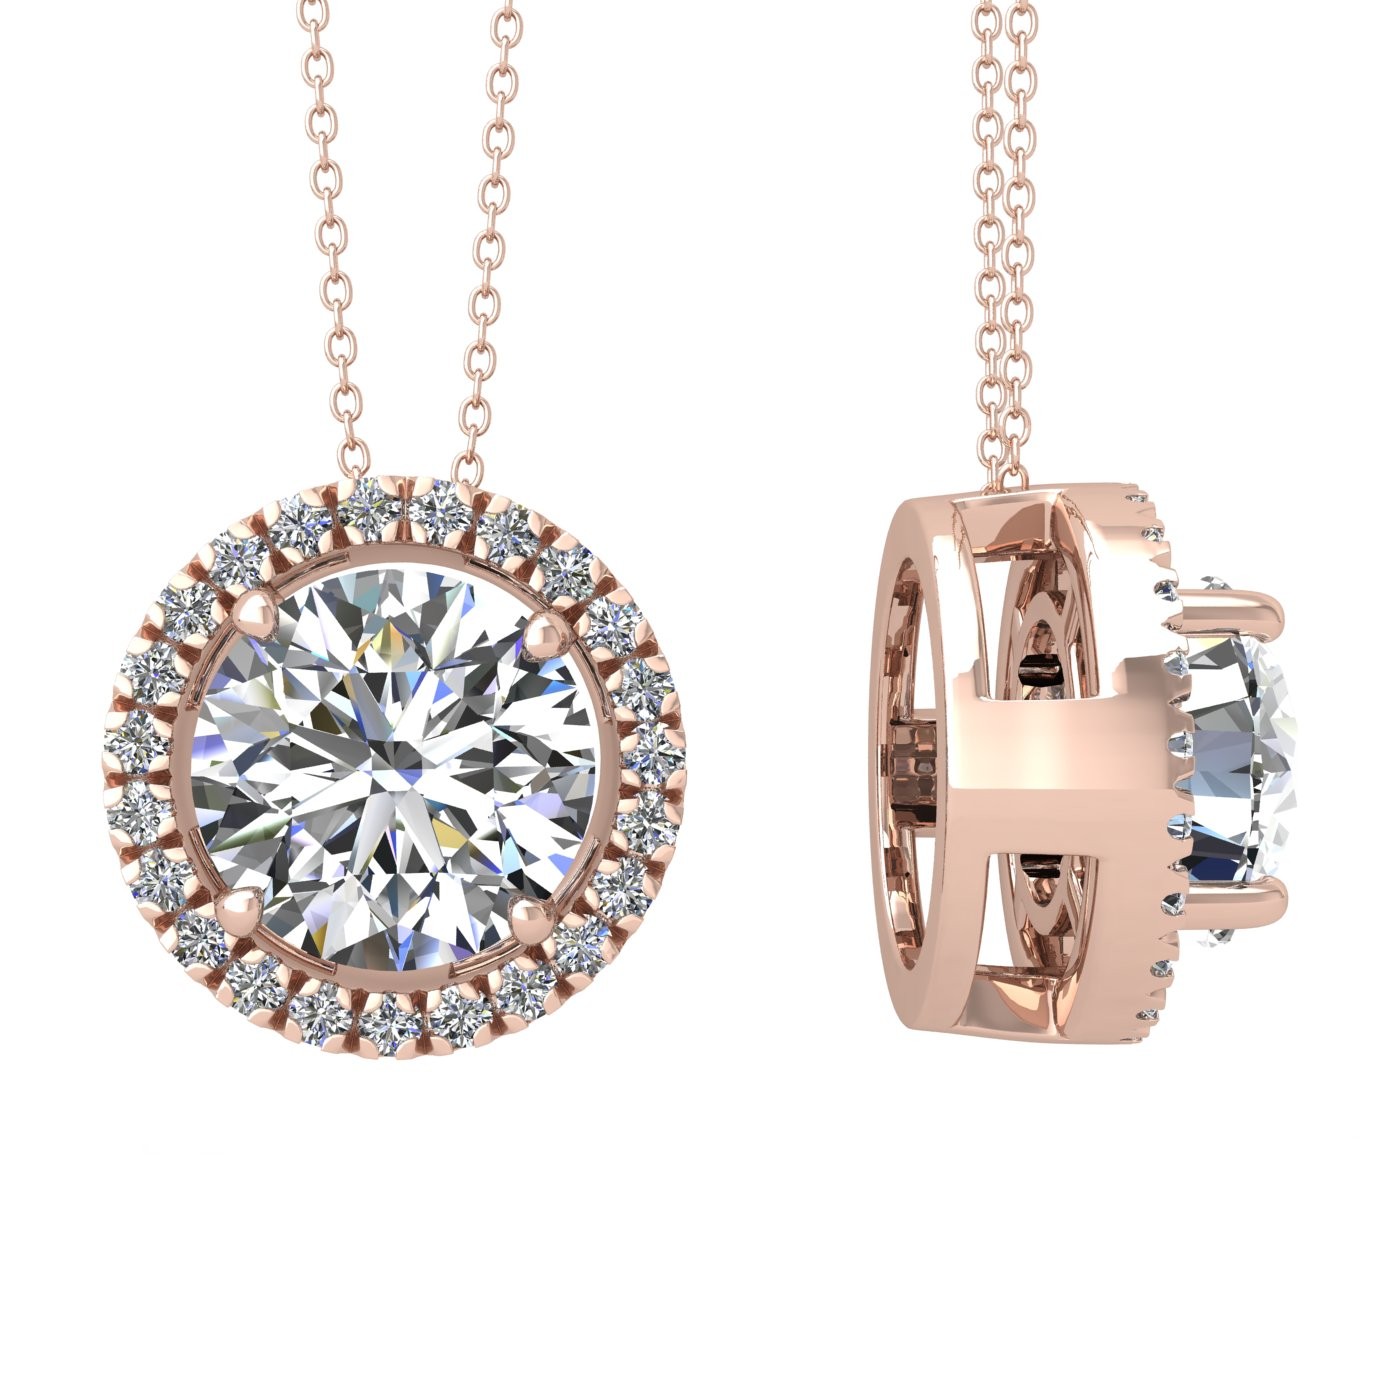 18k rose gold 2 ct 4 prong round shape diamond pendant with diamond pavÉ set halo including chain seperate from the pendant Photos & images